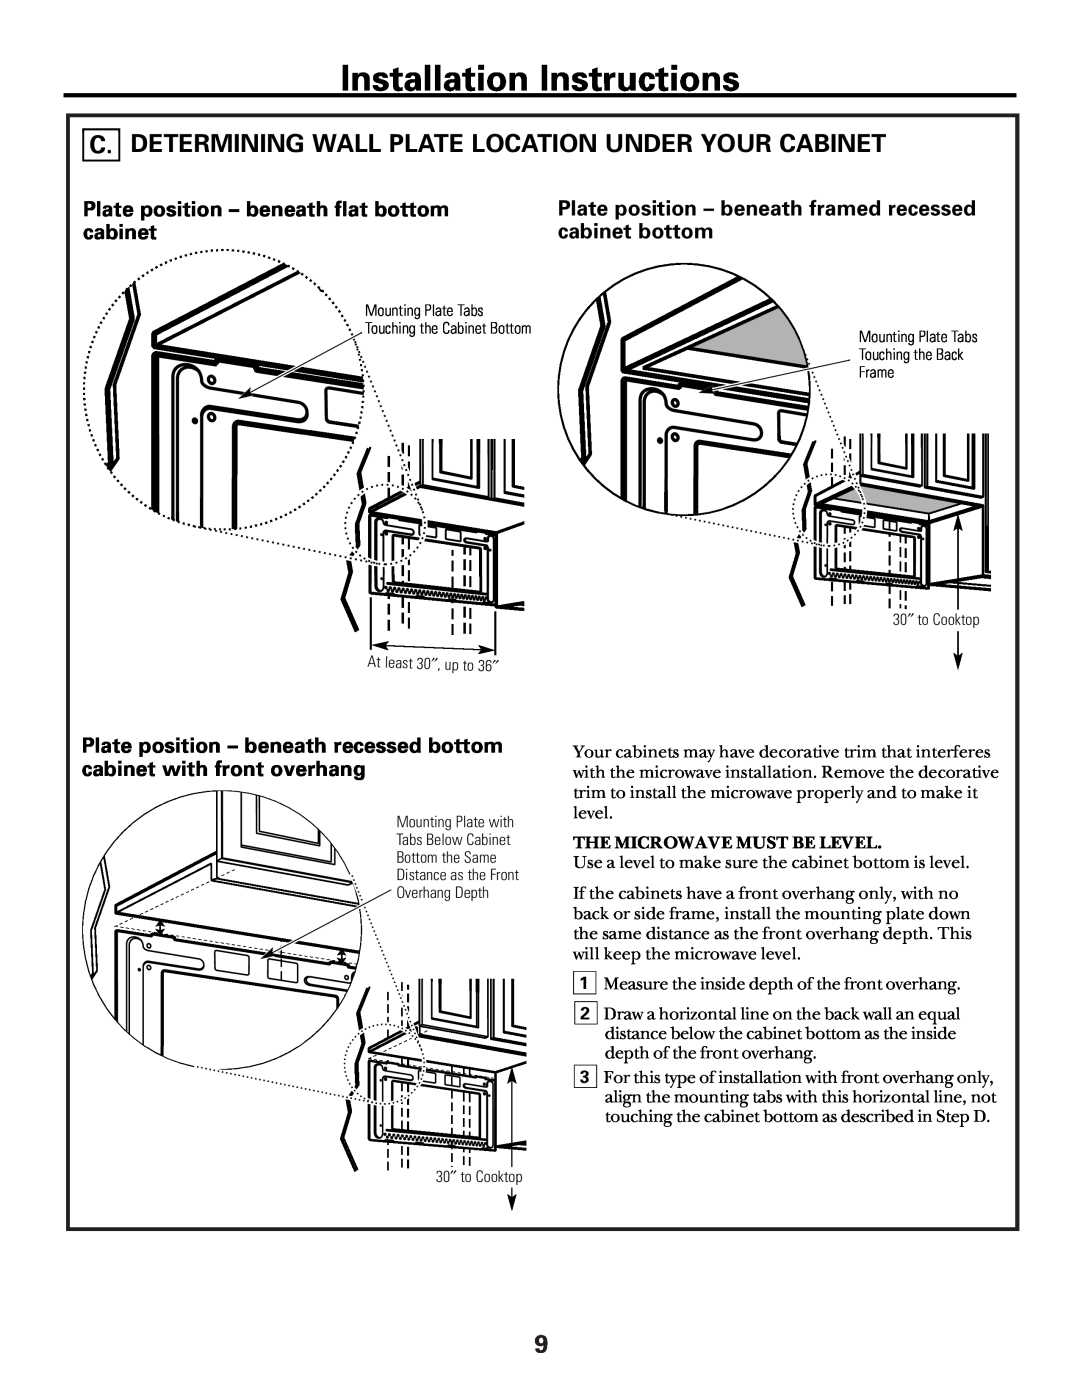 GE Over the Range Microwave Oven manual C. Determining Wall Plate Location Under Your Cabinet, Installation Instructions 